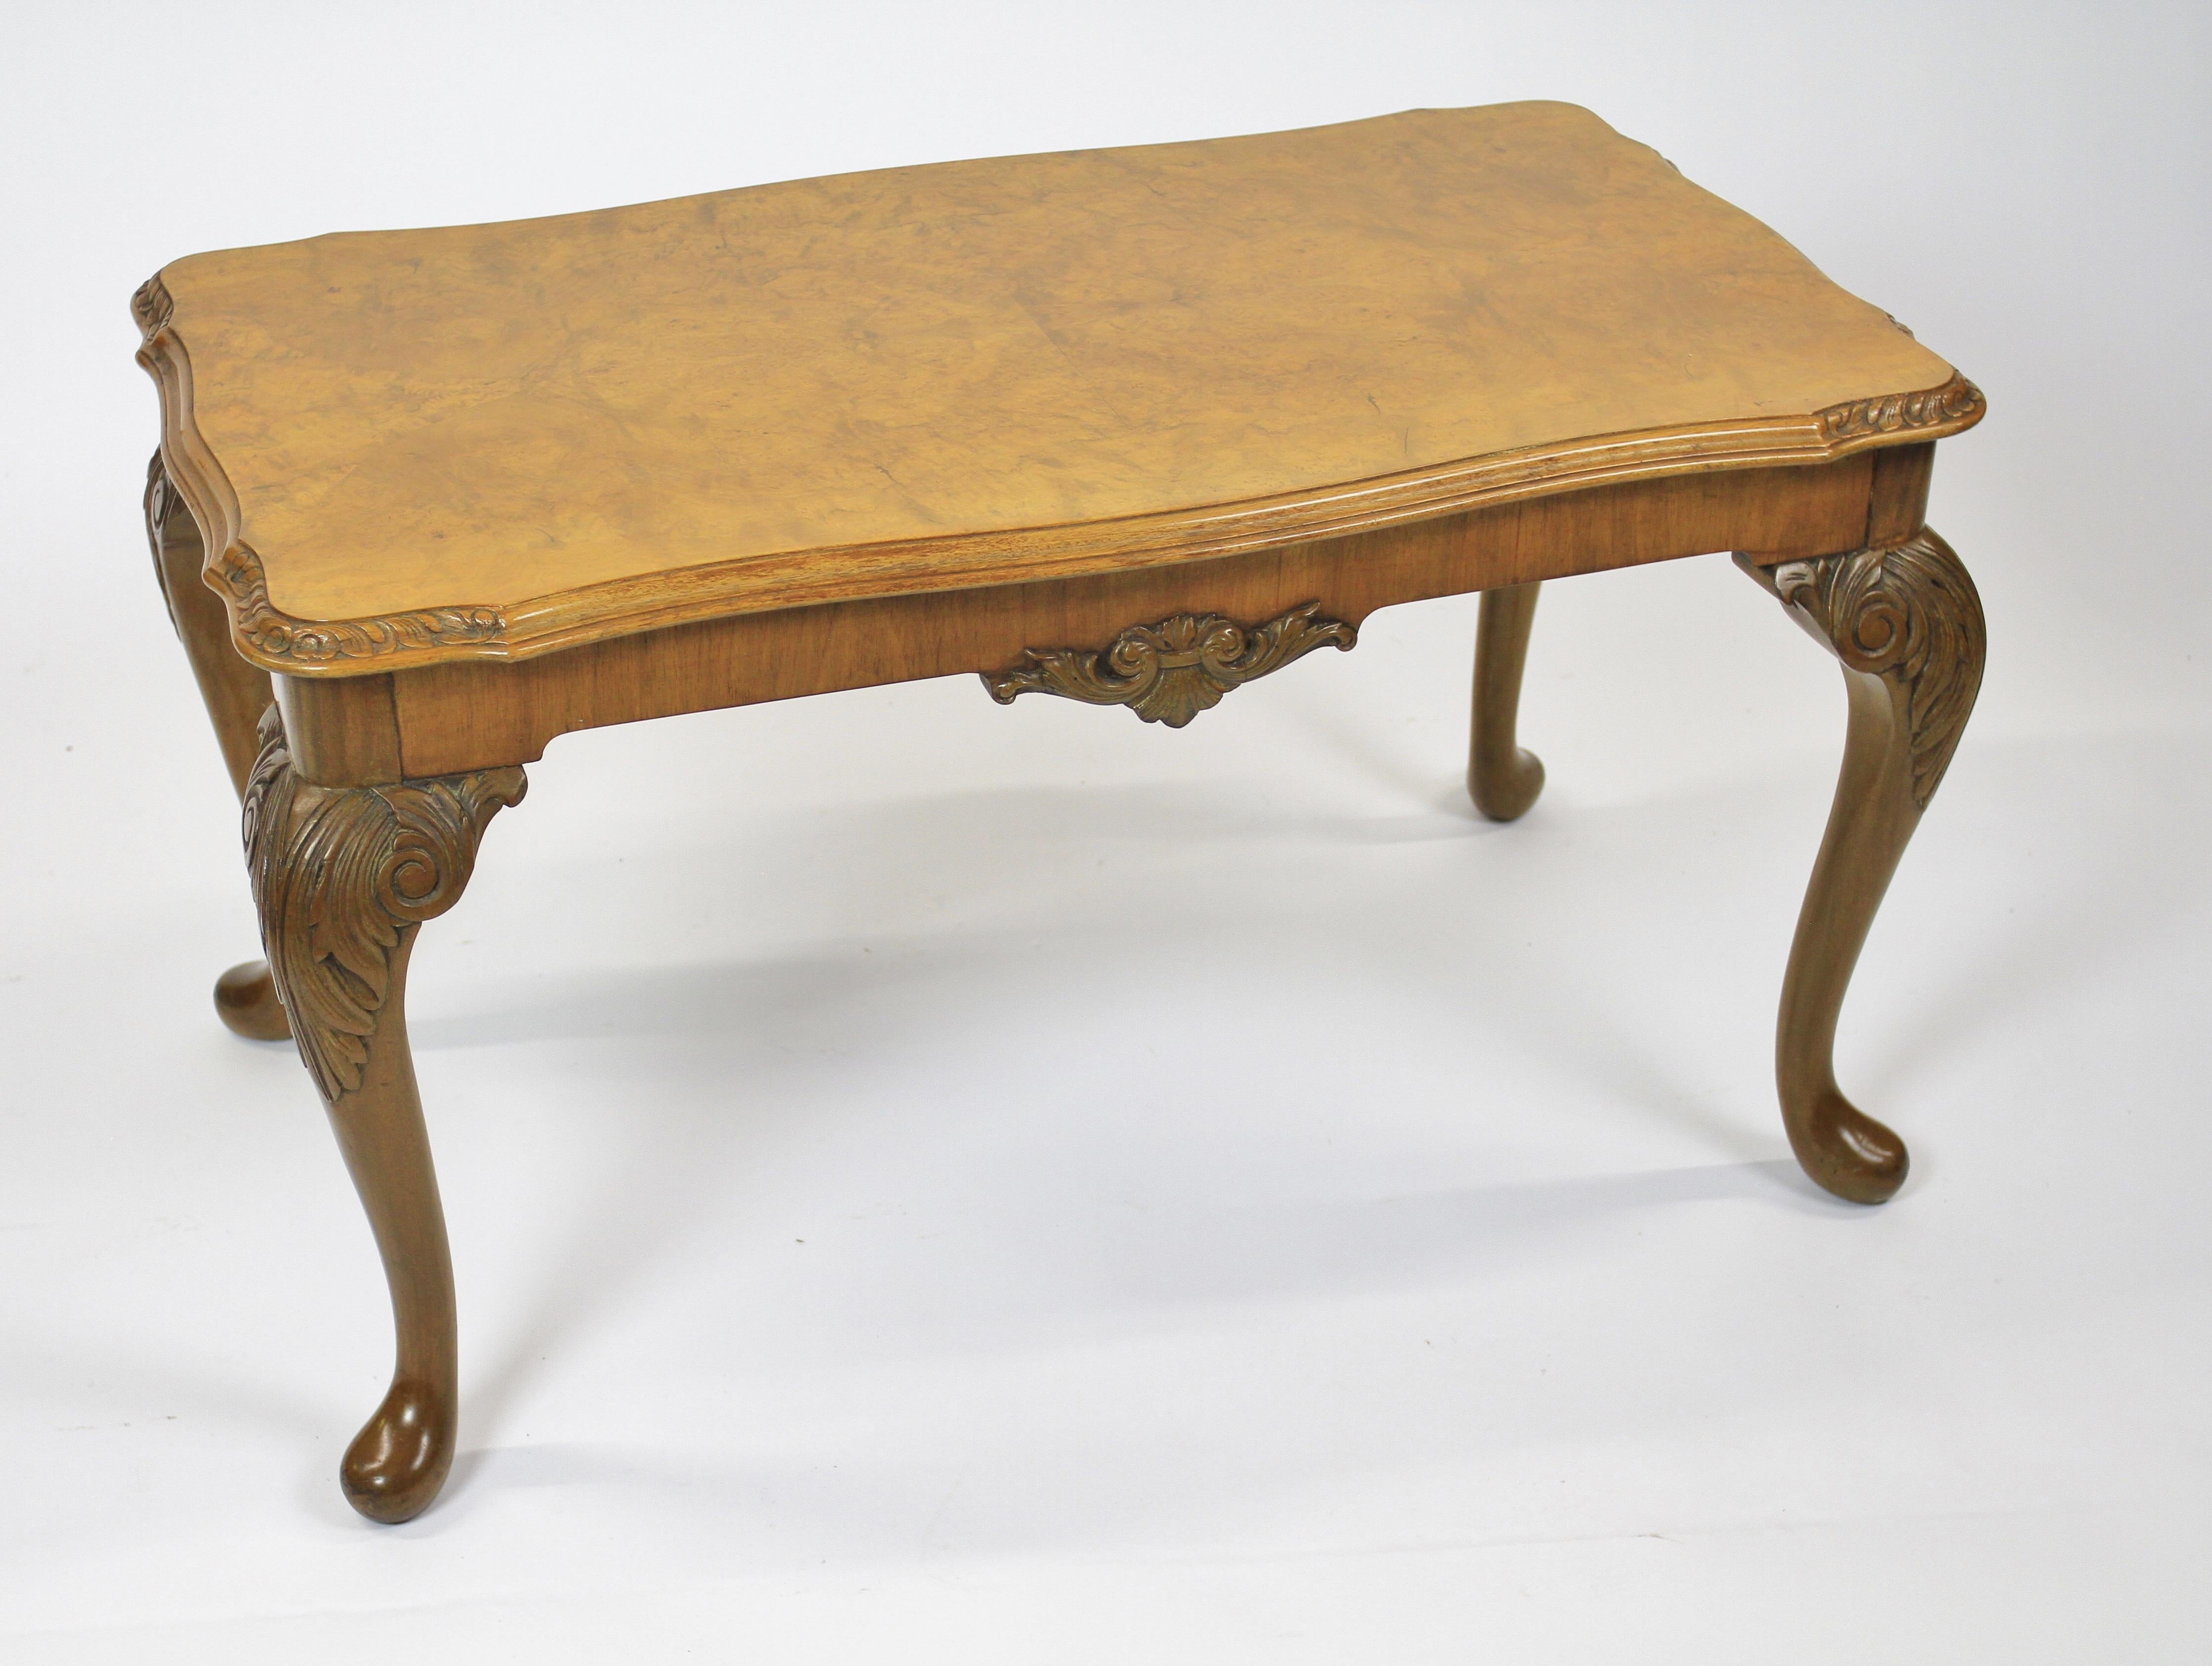 Burr Walnut & Carved Coffee Table circa 1930s
Top With Burr Walnut Veneer, 
Shaped Carved detail on 4 corners. 
Apron with carved shell & scroll detail front & back
Sitting on 4 Cabriole shaped legs with leaf caving on knees
Recently Polished